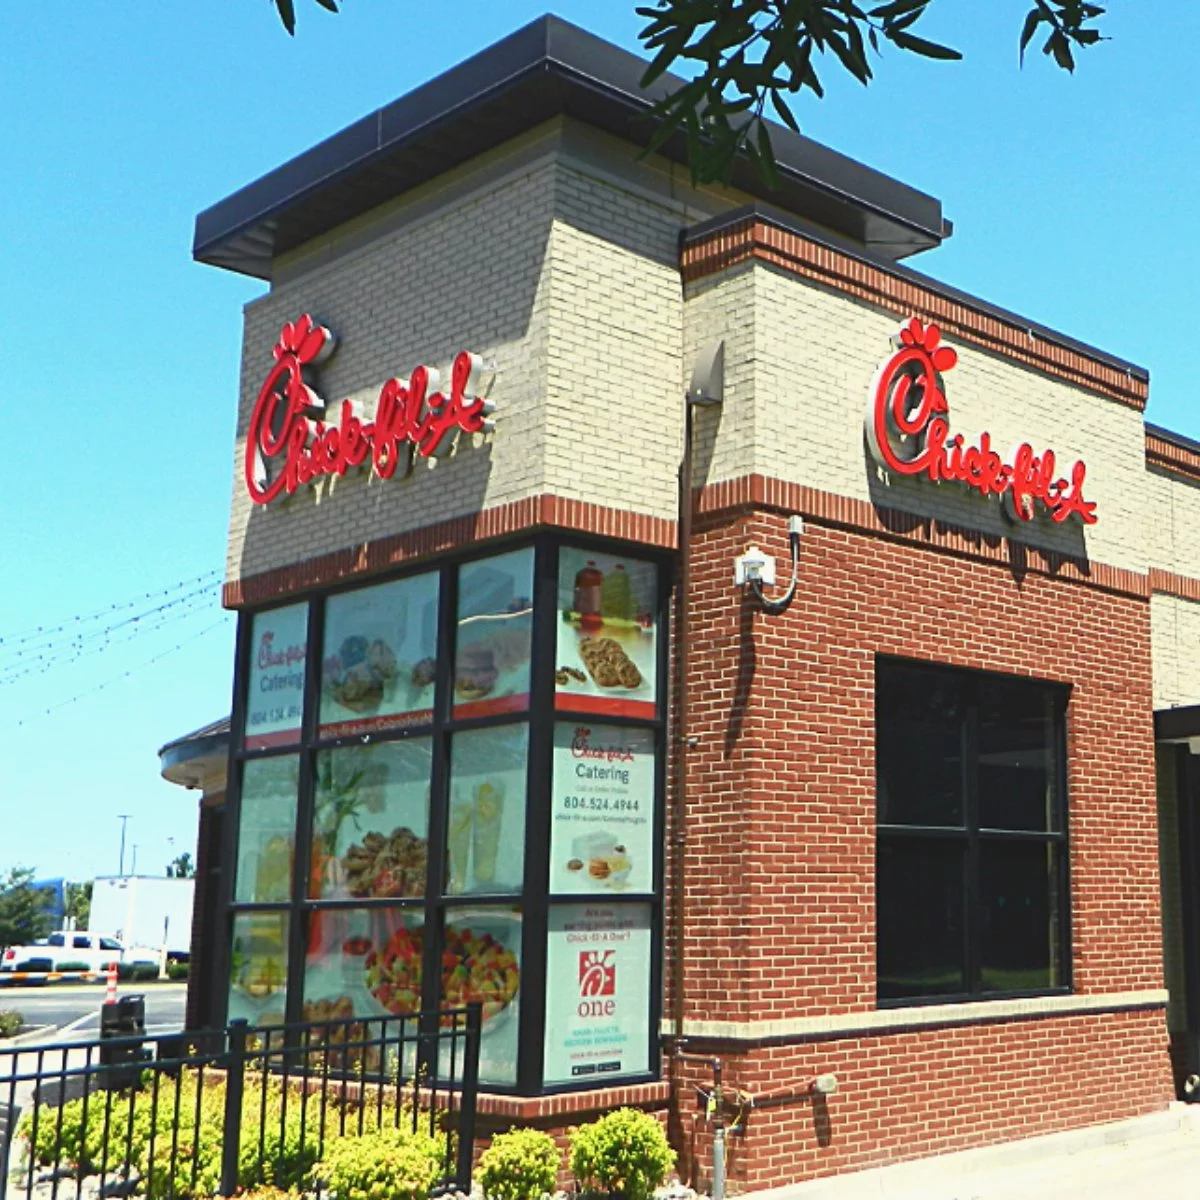 Full Guide to Chick-Fil-A Menu With Prices